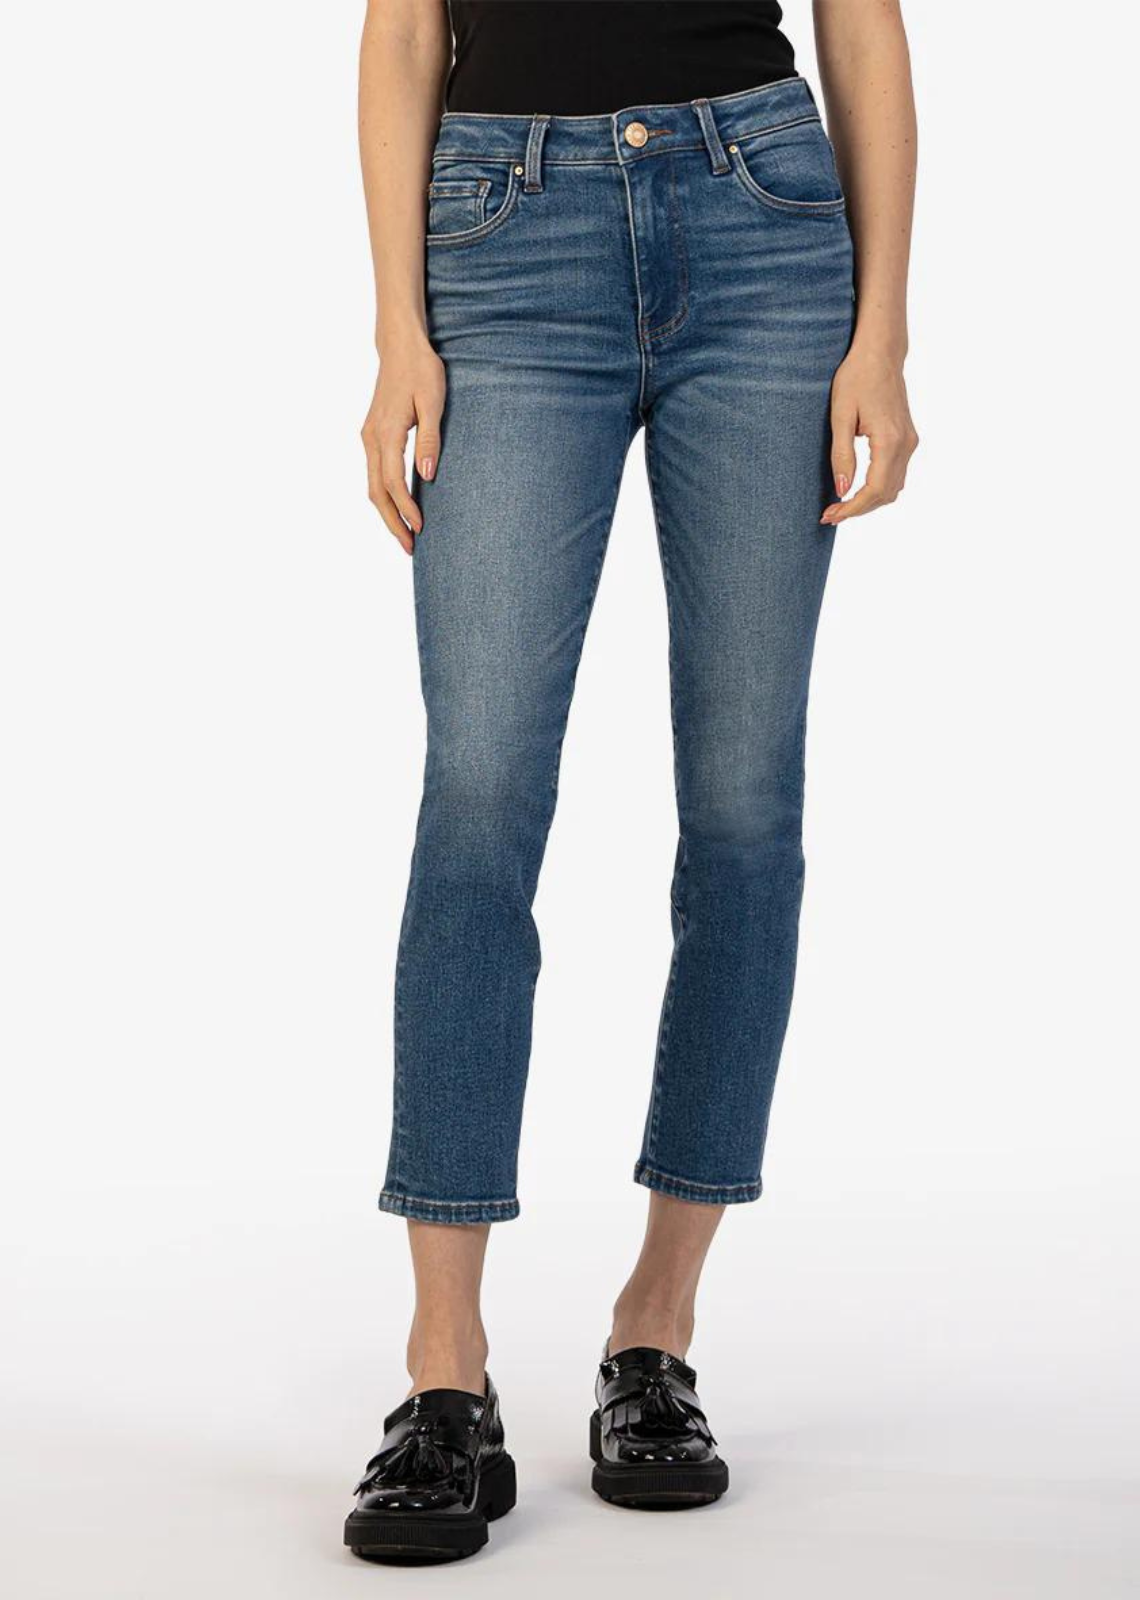 KUT FROM THE KLOTH Ana High Rise Flare Jean